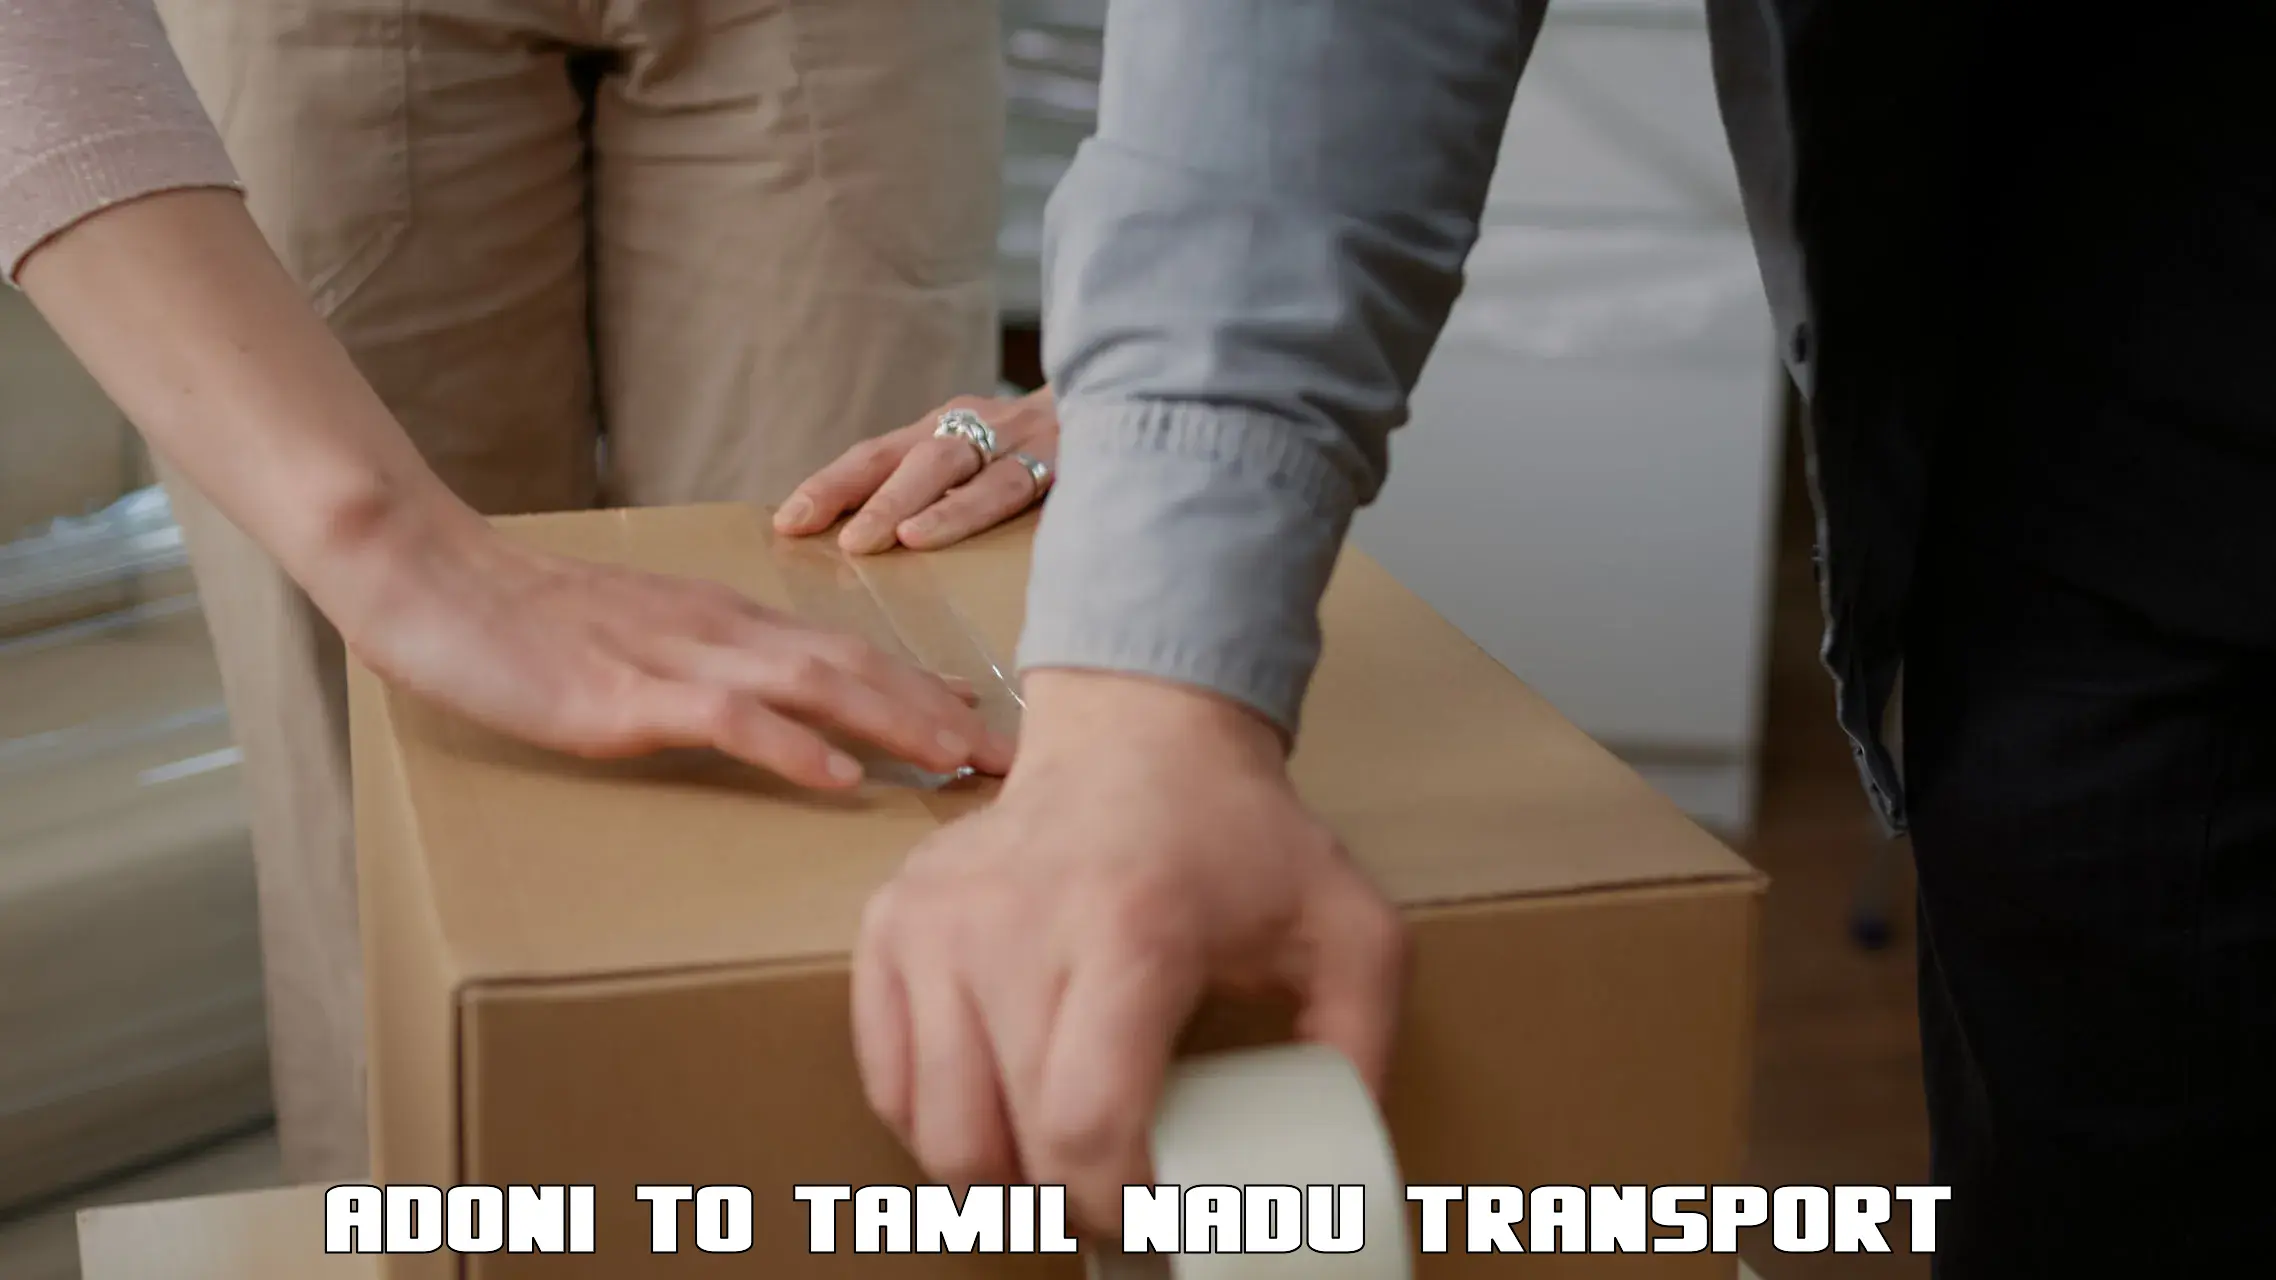 Transport bike from one state to another Adoni to Tamil Nadu